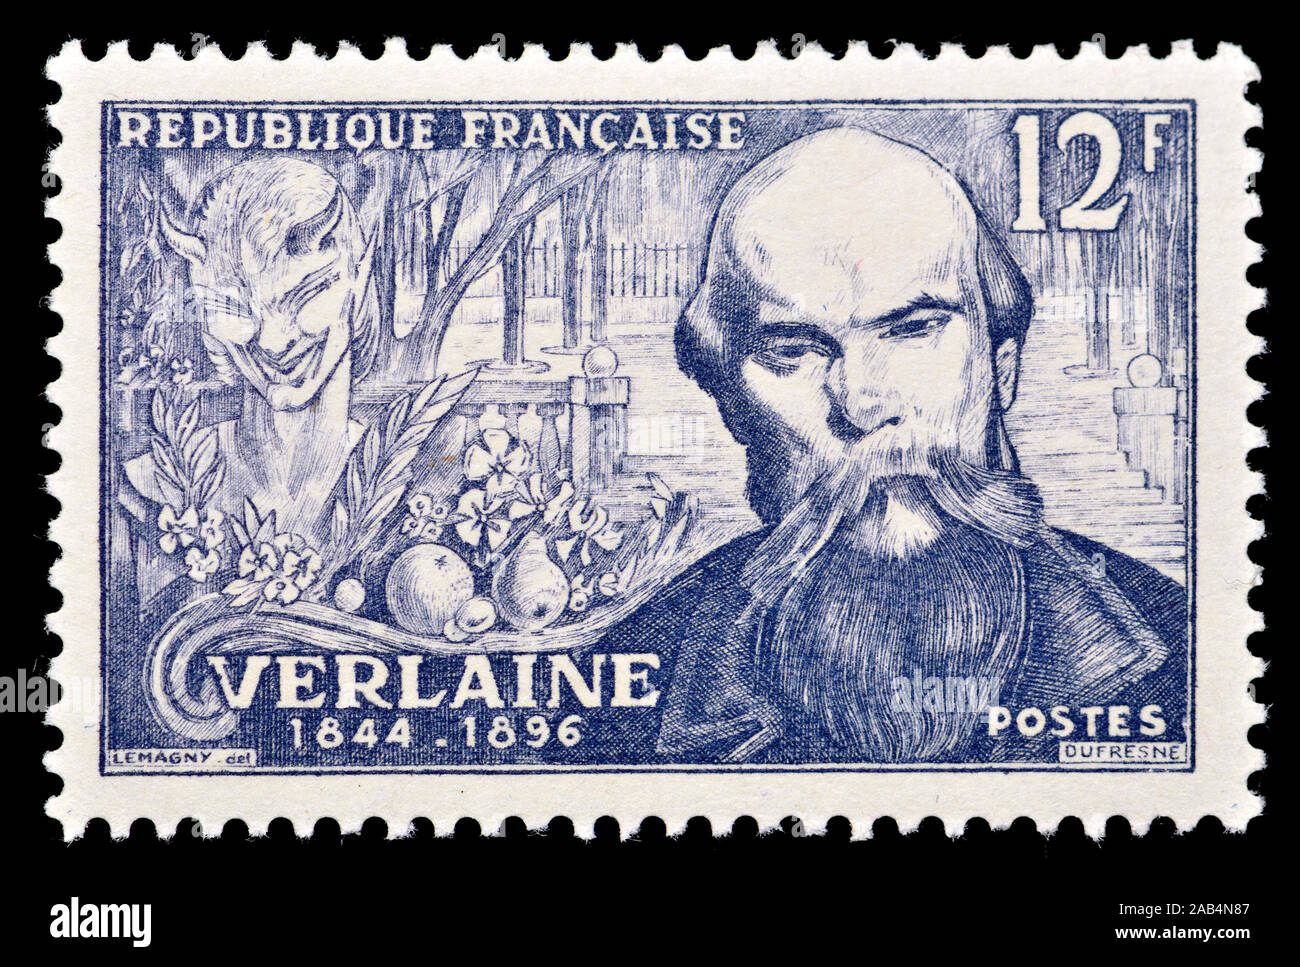 French postage stamp (1951) : Paul-Marie Verlaine (1844 – 1896) French ...